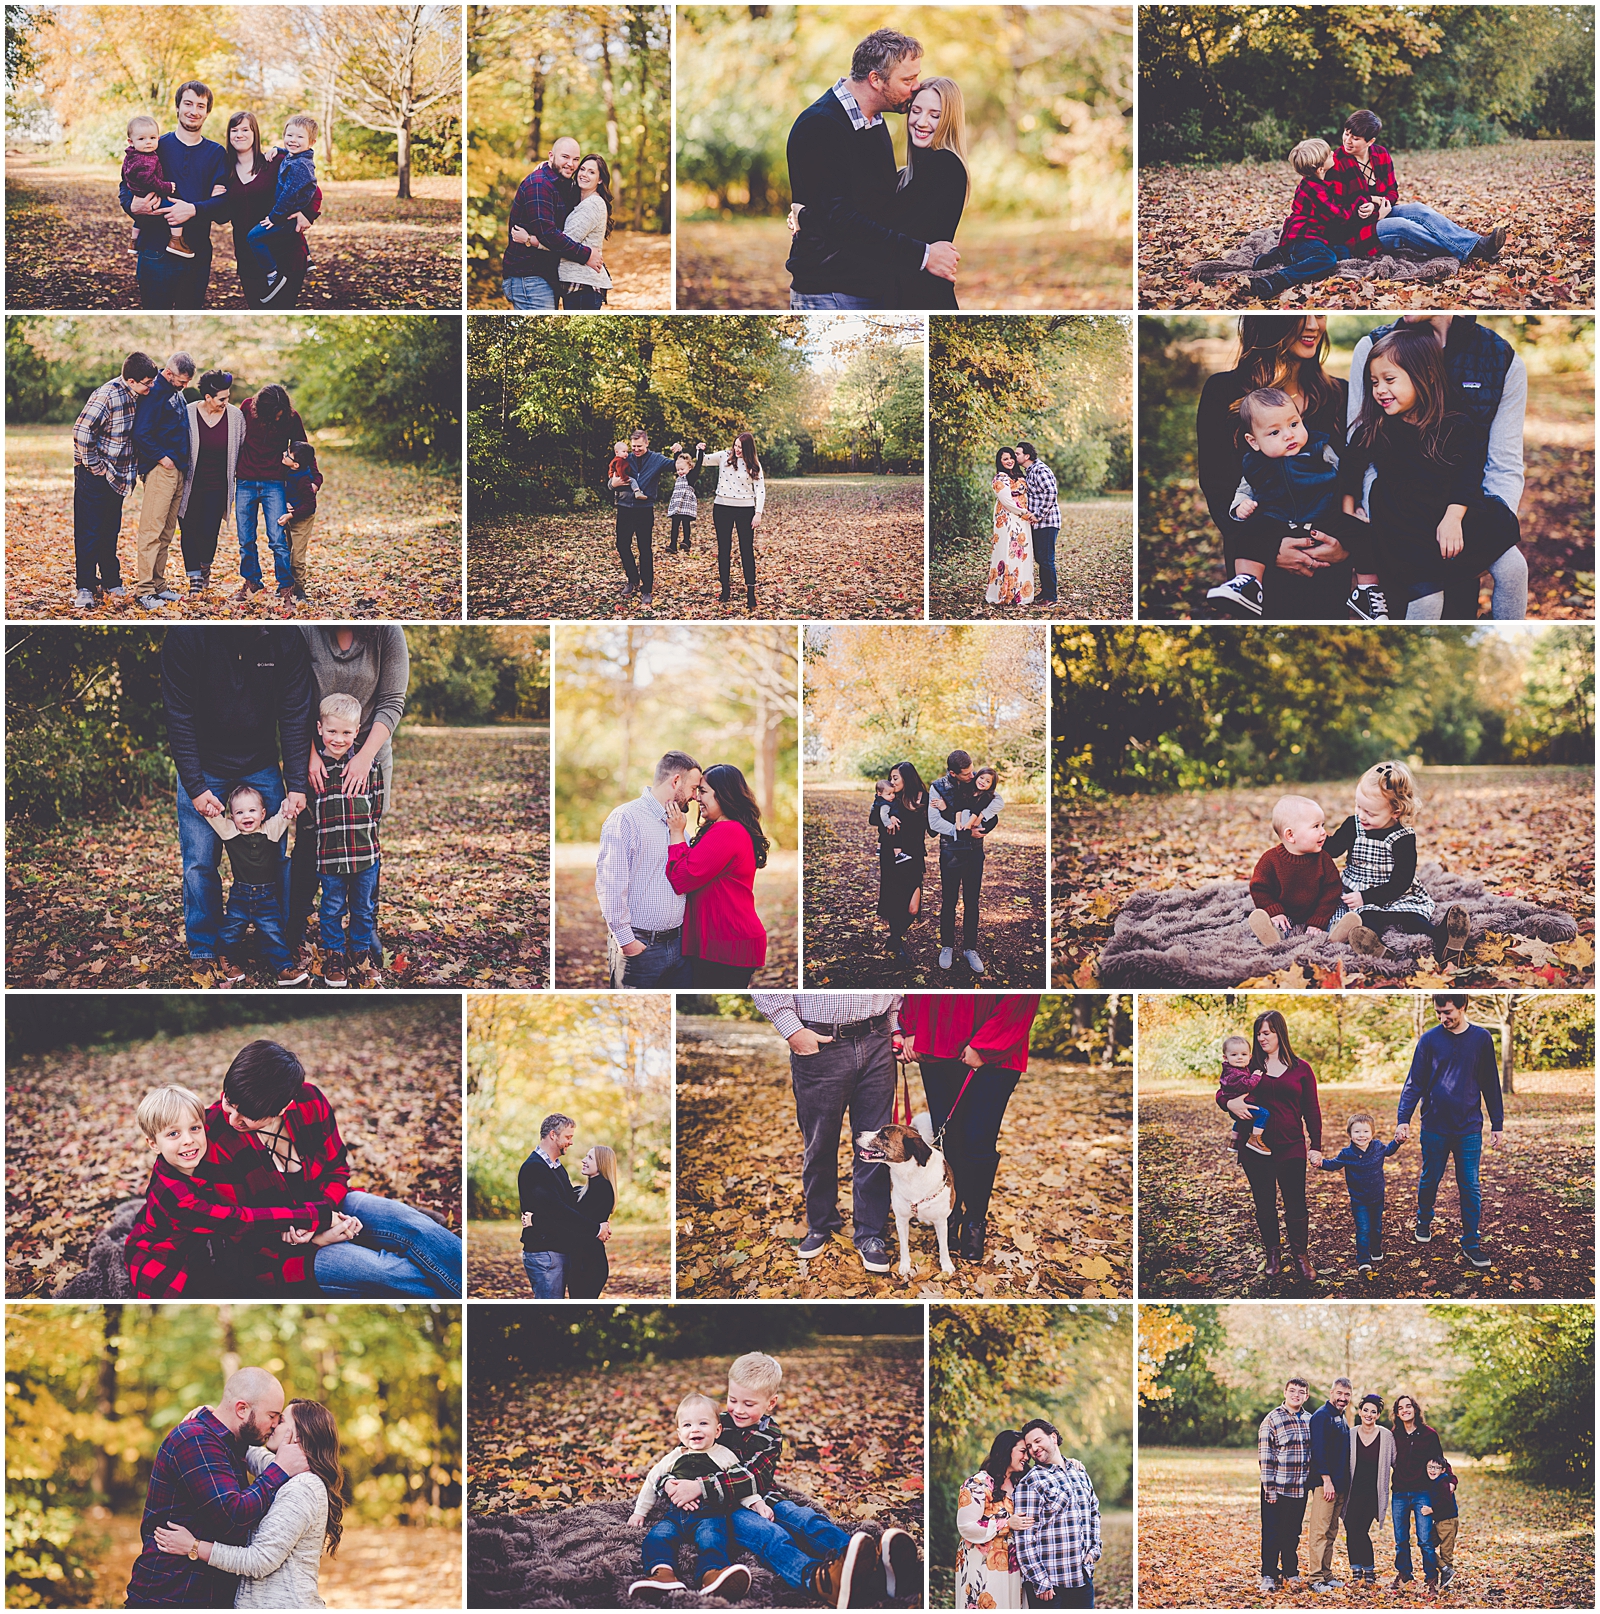 Fall mini sessions at Perry Farm Park in Bradley, Illinois with Chicagoland wedding photographer Kara Evans Photographer.